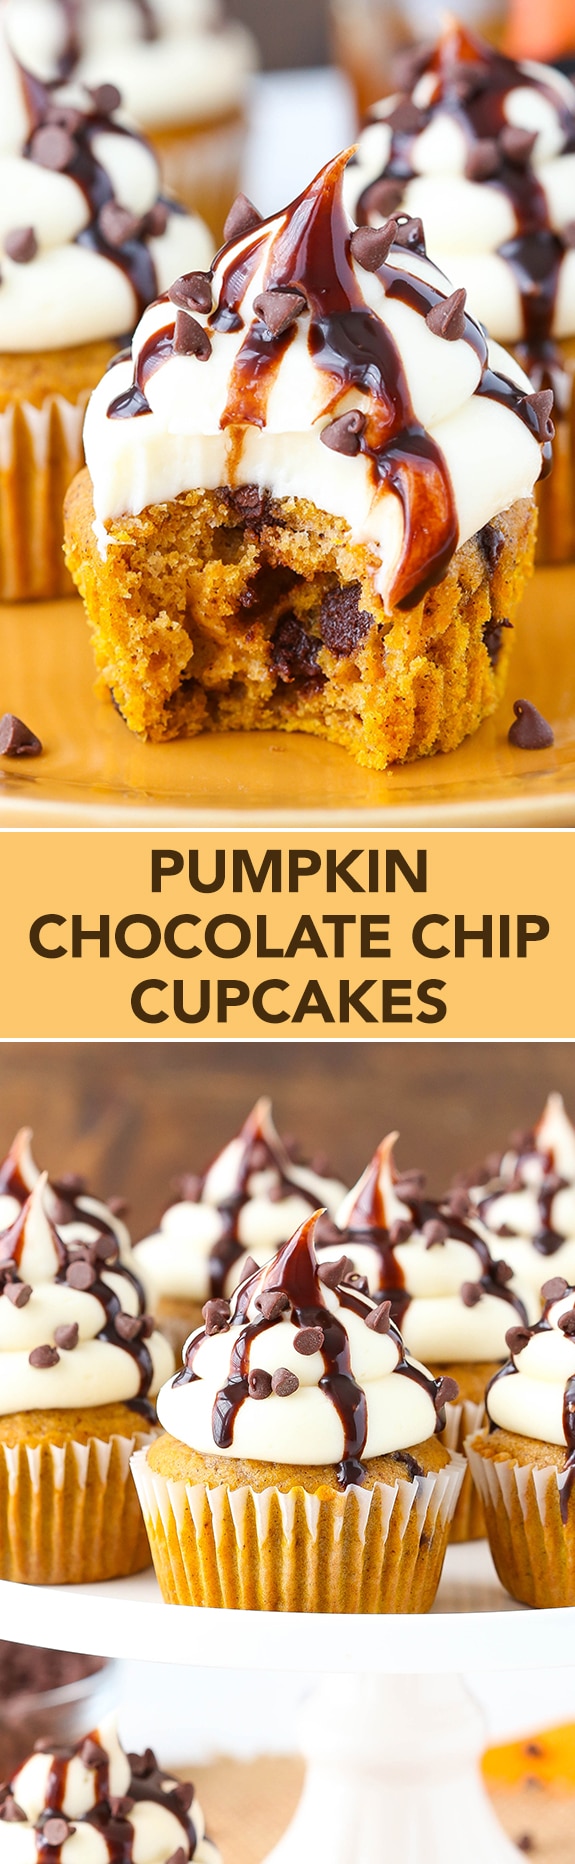 Pumpkin Chocolate Chip Cupcakes with Cream Cheese Frosting Pinterest image.